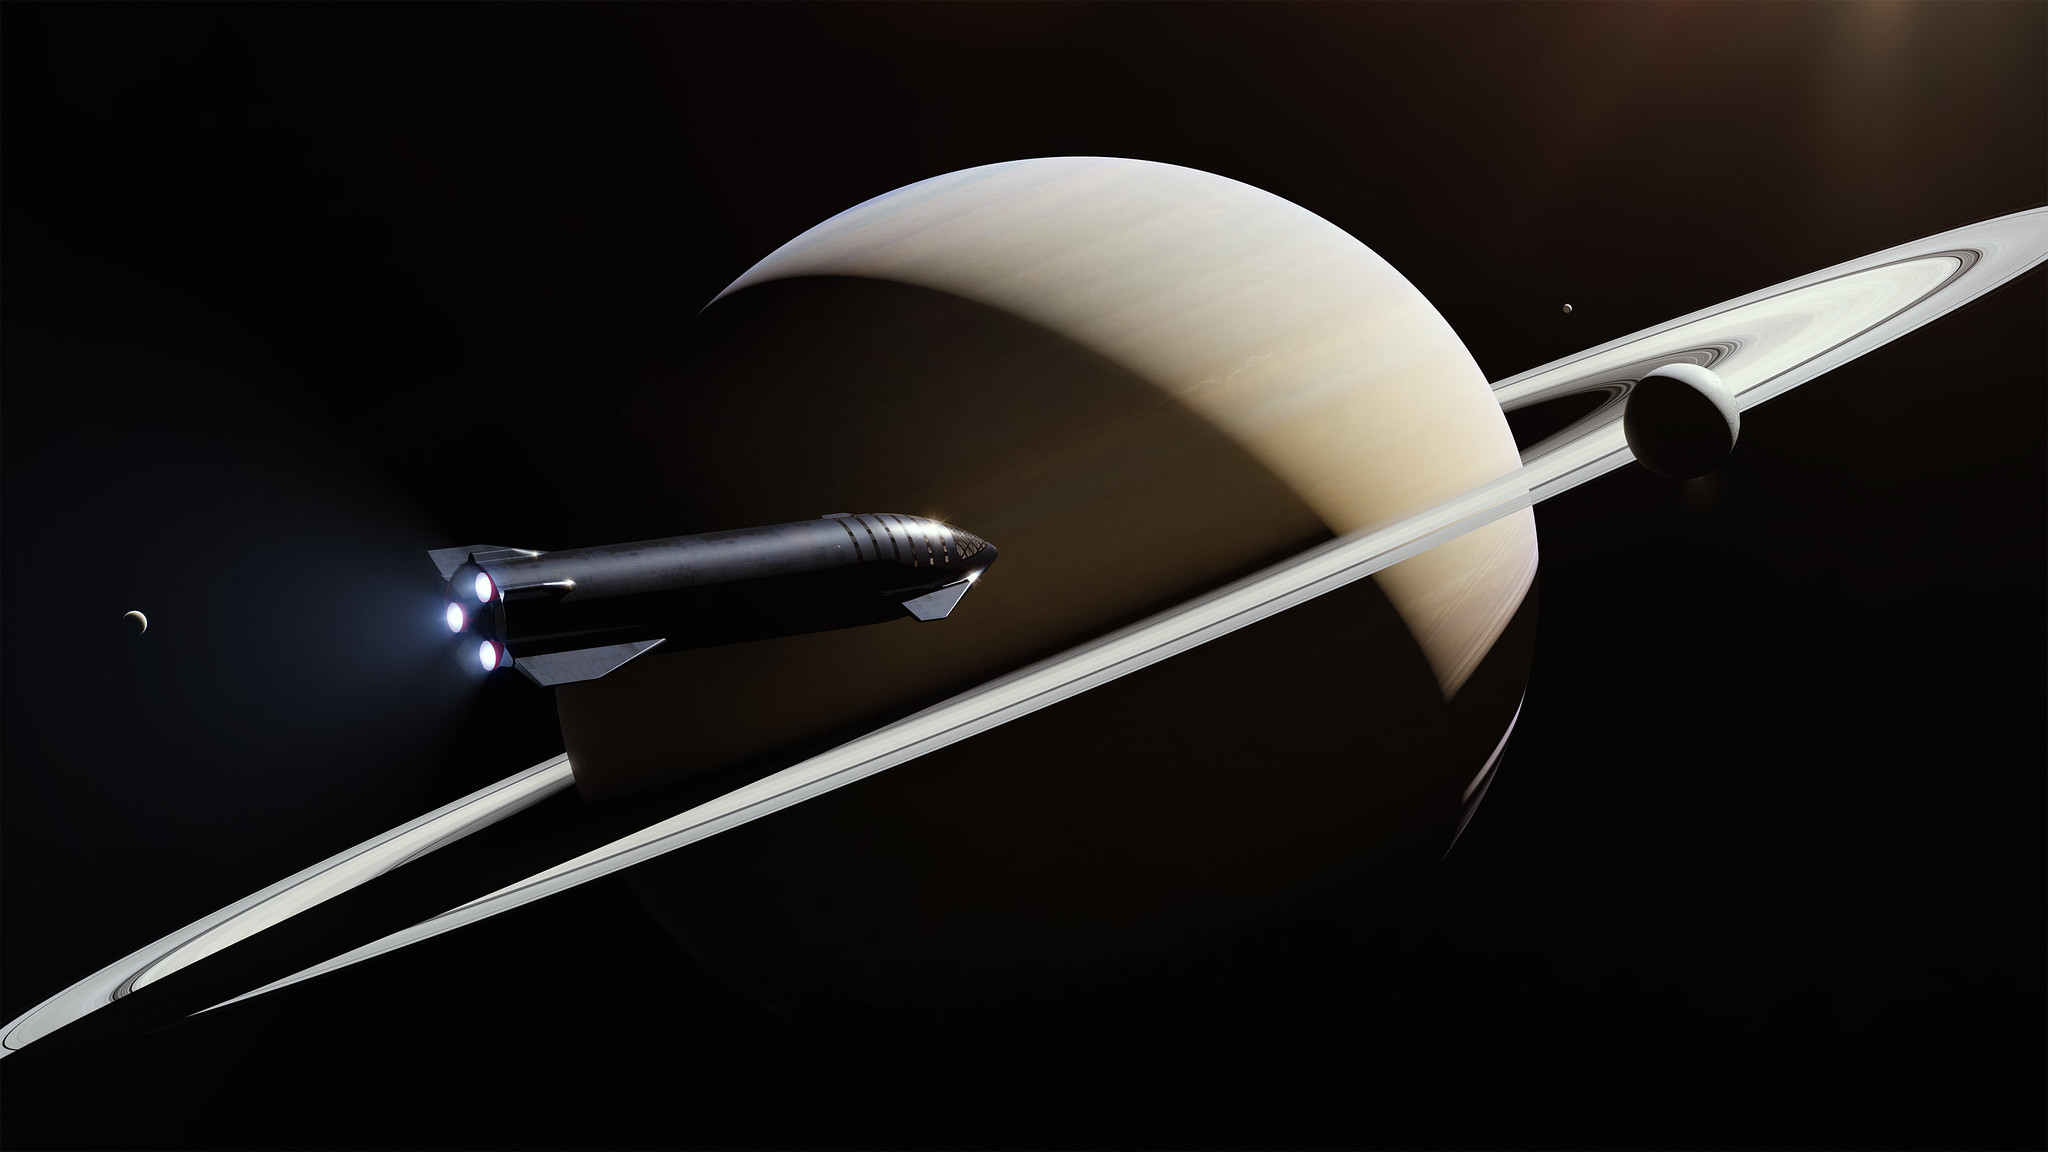 Planetary scientists are starting to get stirred up by Starship's potential  | Ars Technica